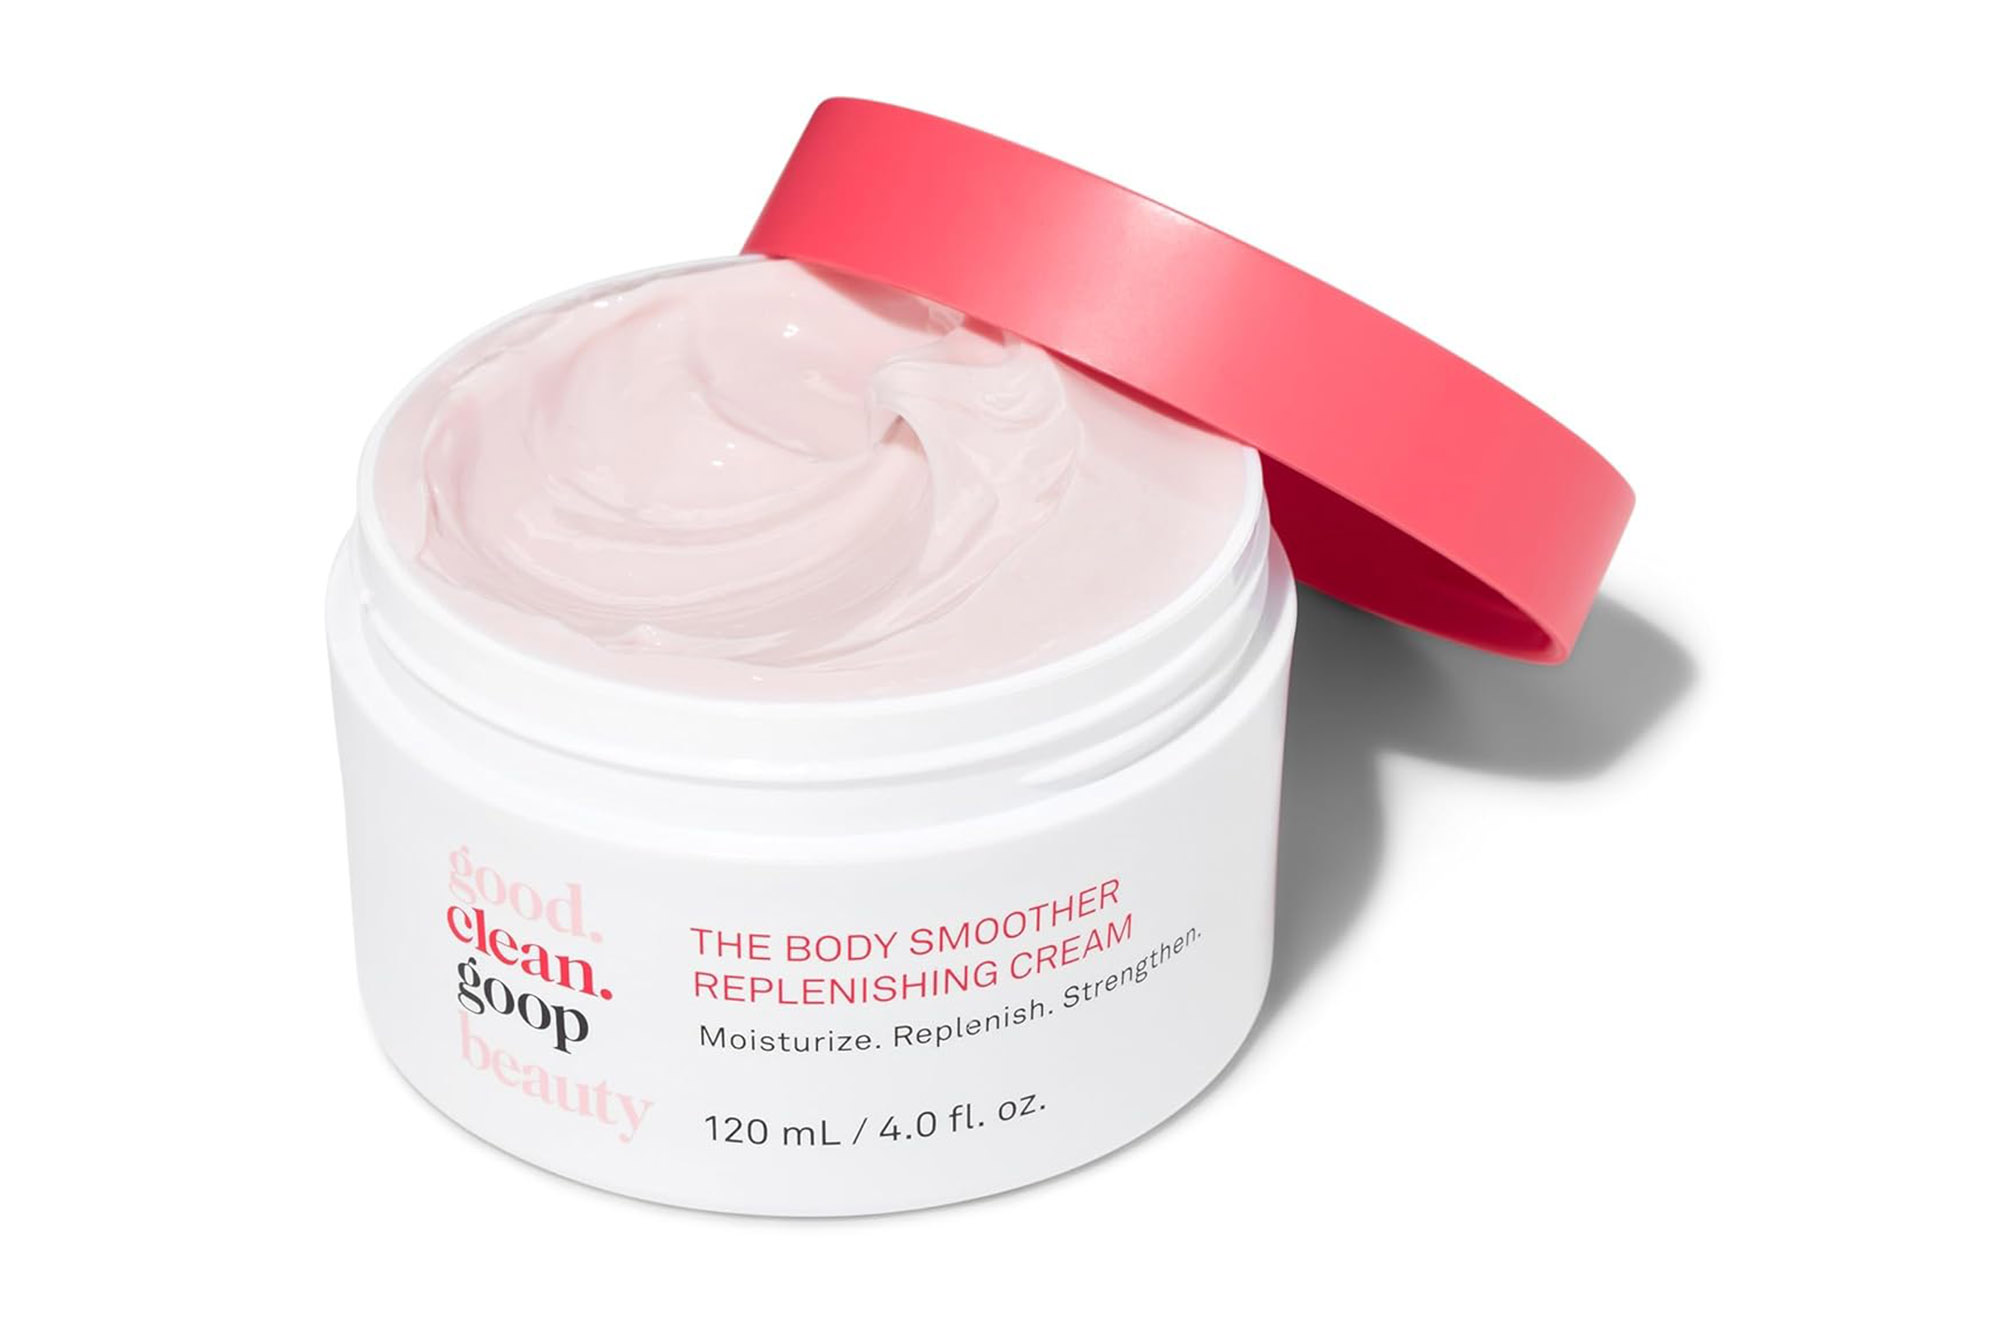 Good.clean.goop The Body Smoother Replenishing Cream